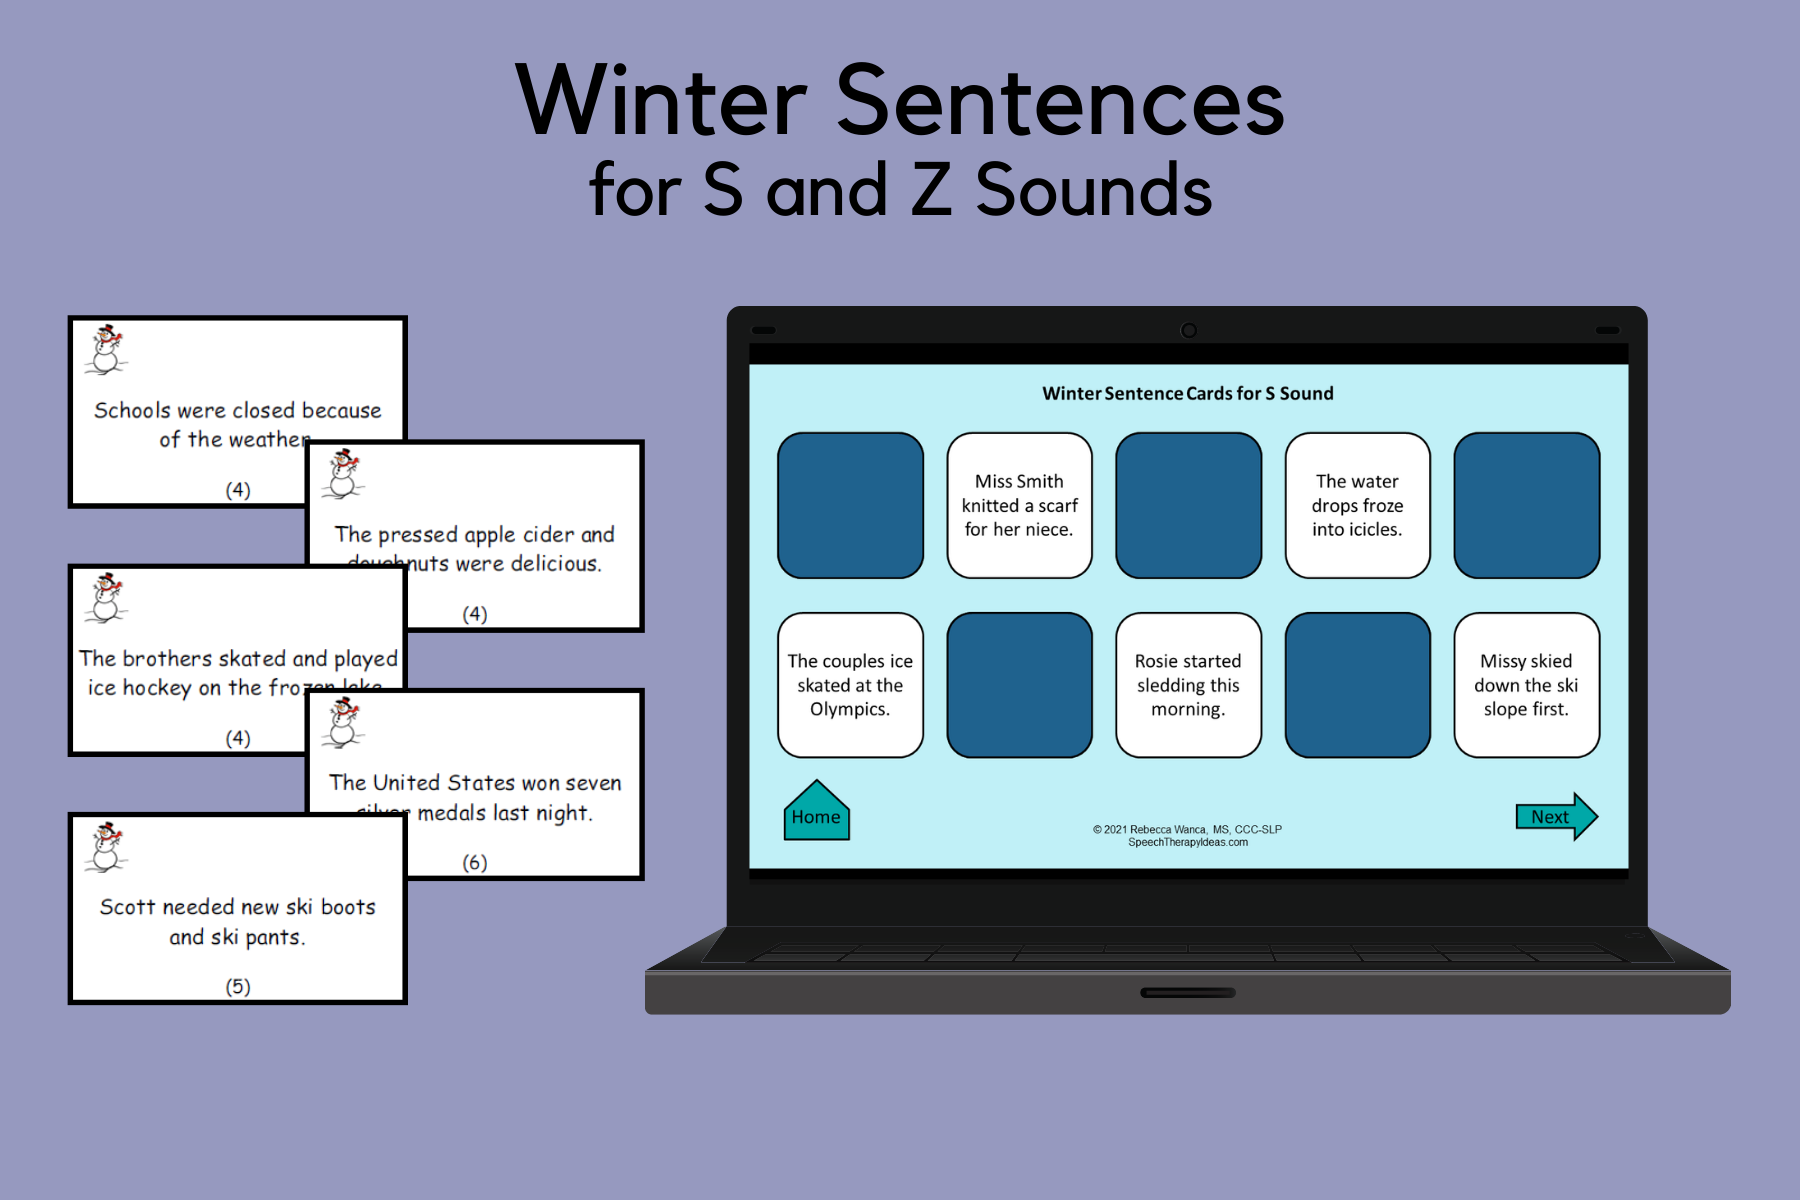 Winter Sentences for S and Z Sounds